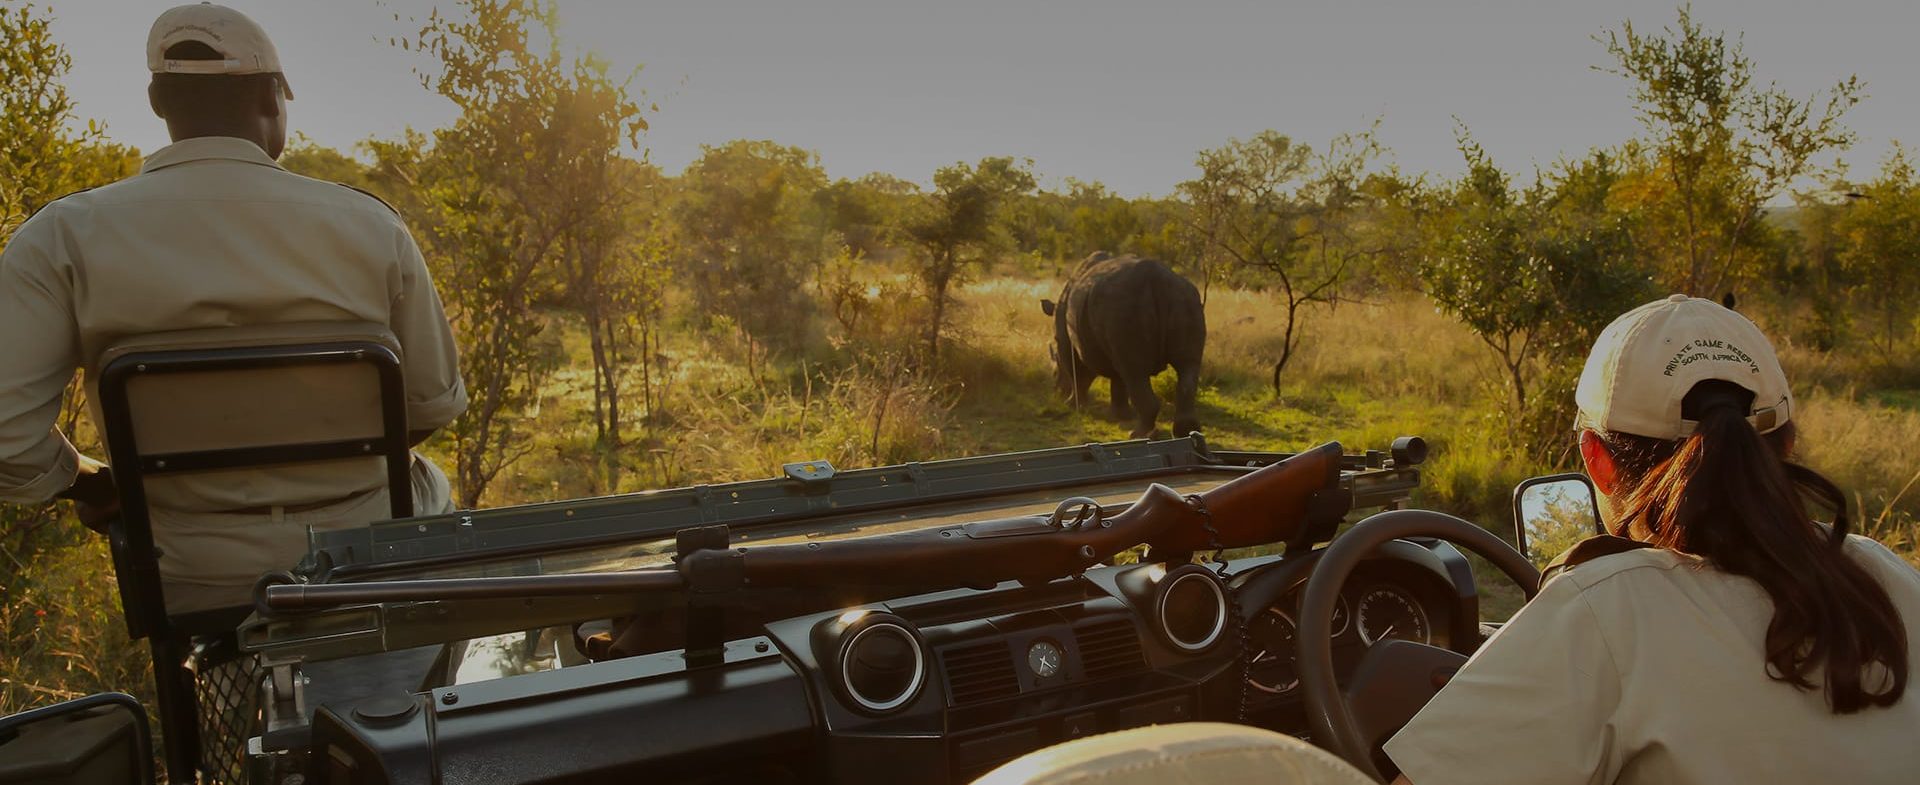 Two people, one wearing a hat and the other a cap, are seated in a luxury safari vehicle watching a distant rhinoceros in a grassy savannah during sunset.